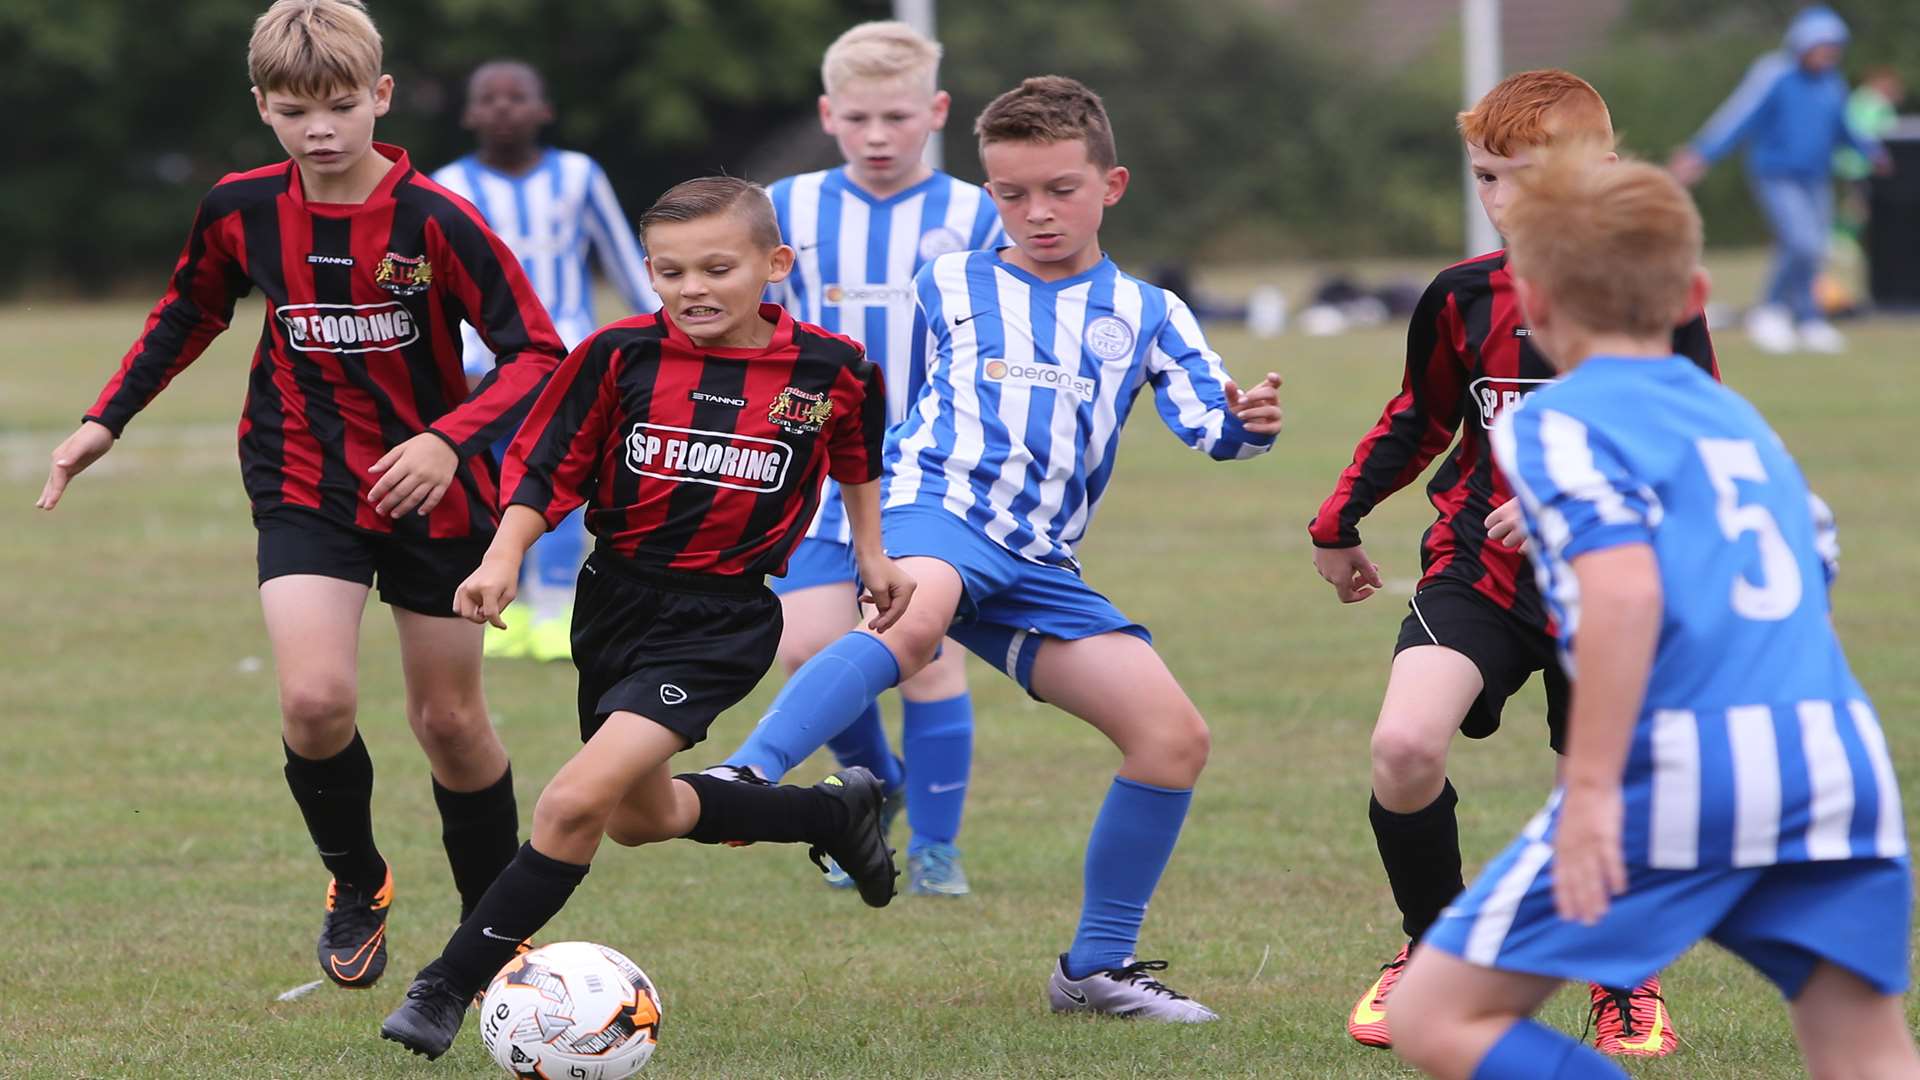 Woodcoombe FC's under-12s (red and black) in possession against Chatham Riverside Rangers in the League Cup Picture: Grant Melton